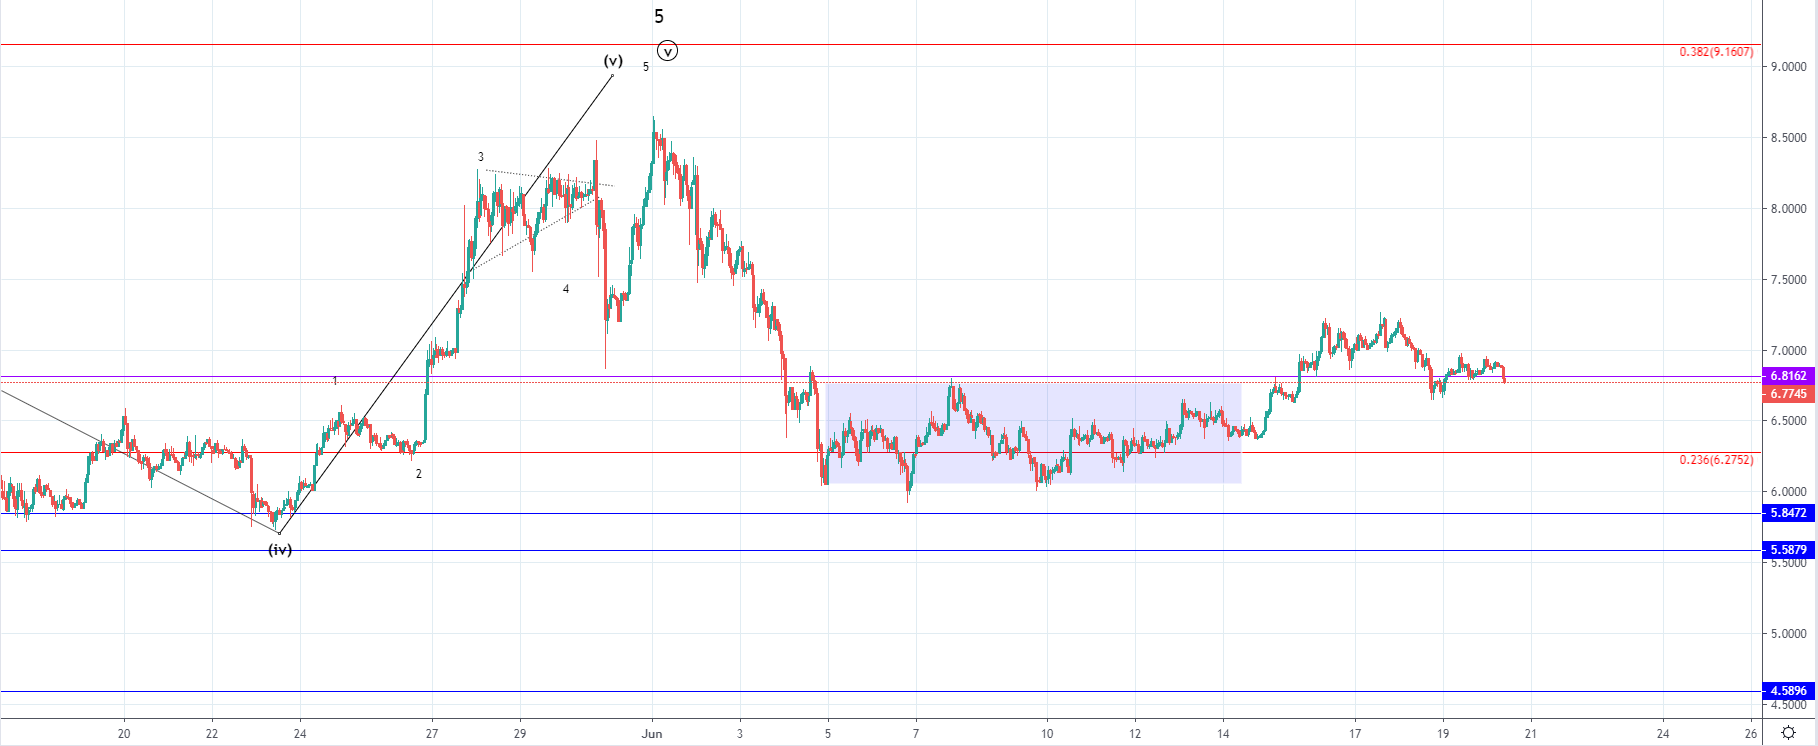 EOS/USD and LTC/USD struggling to keep up the upward momentum